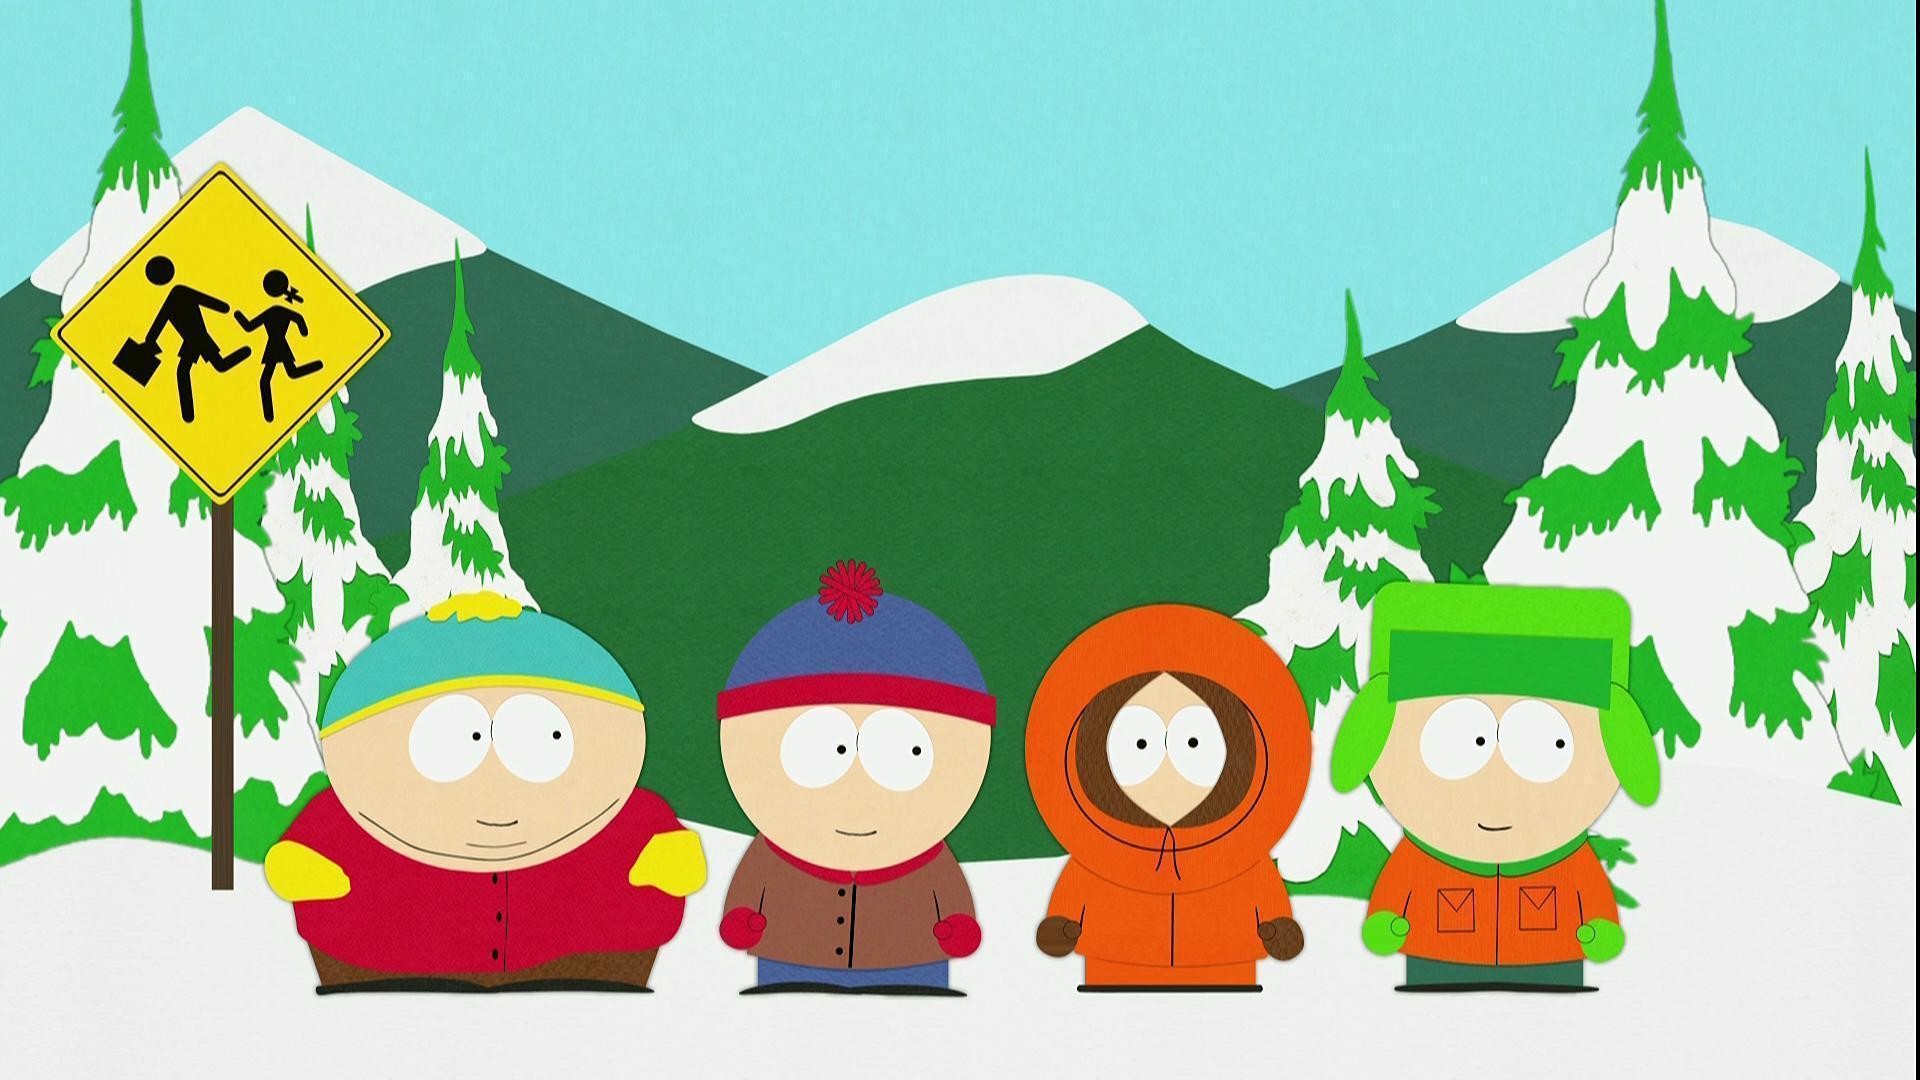 South Park Wallpapers